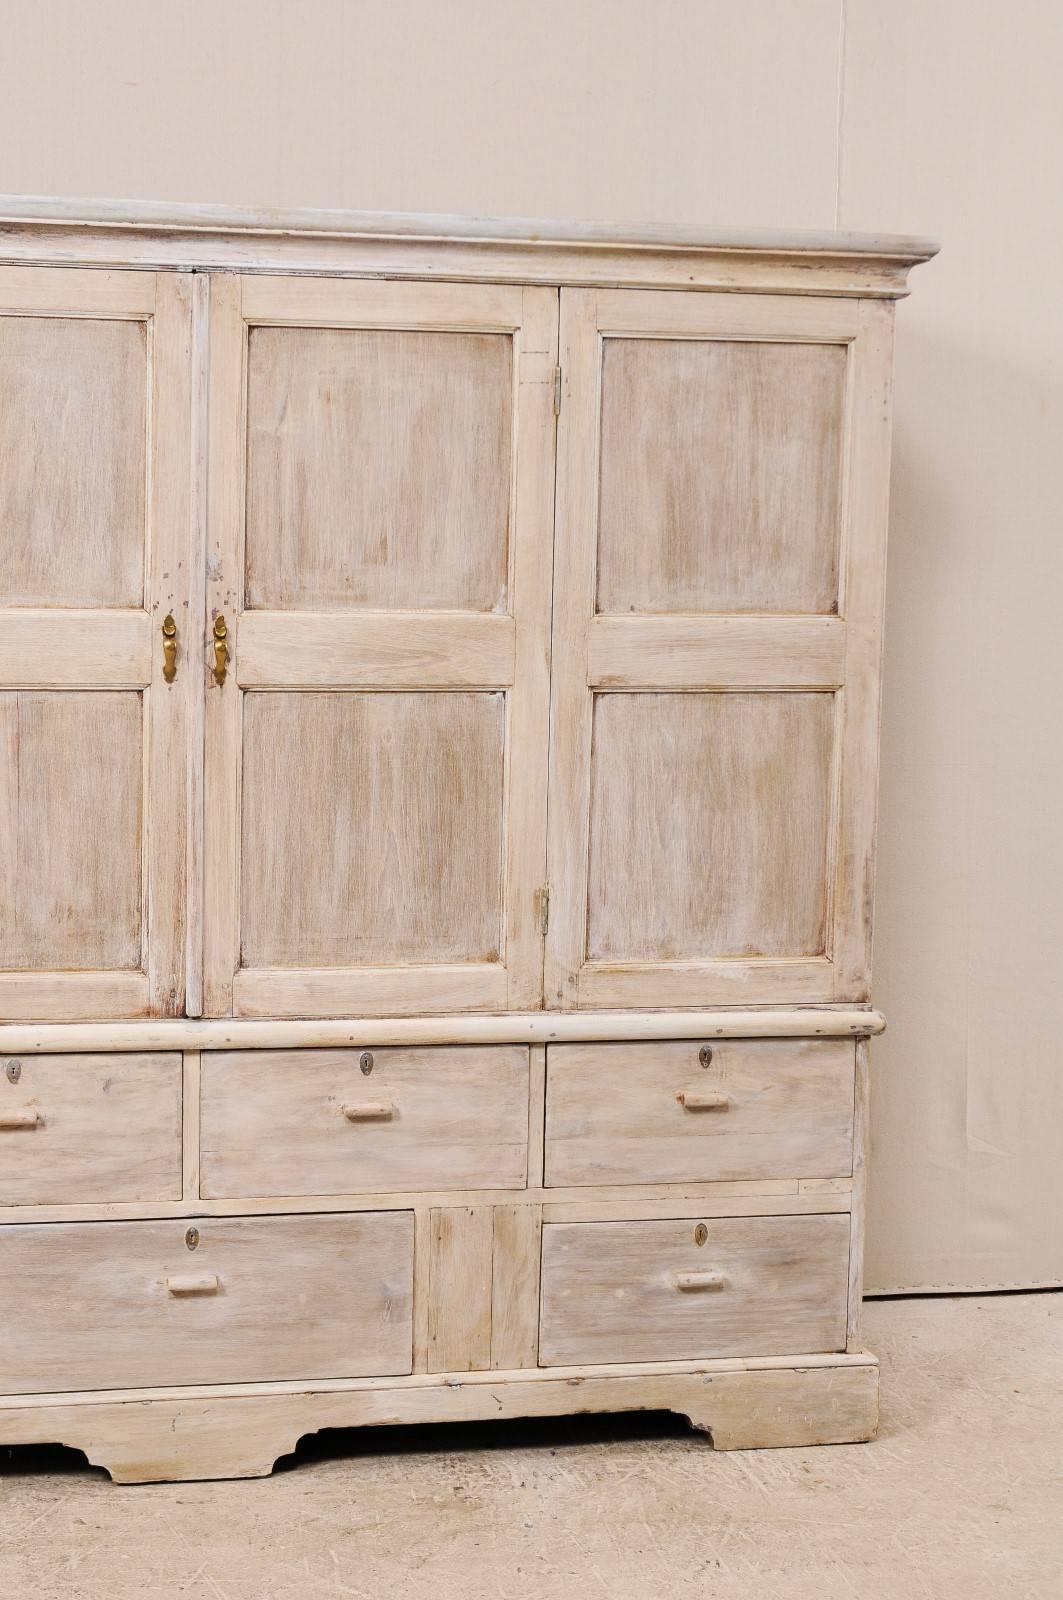 Large 19th Century British Colonial Wood Cabinet in Soft Neutral Cream Wash 1